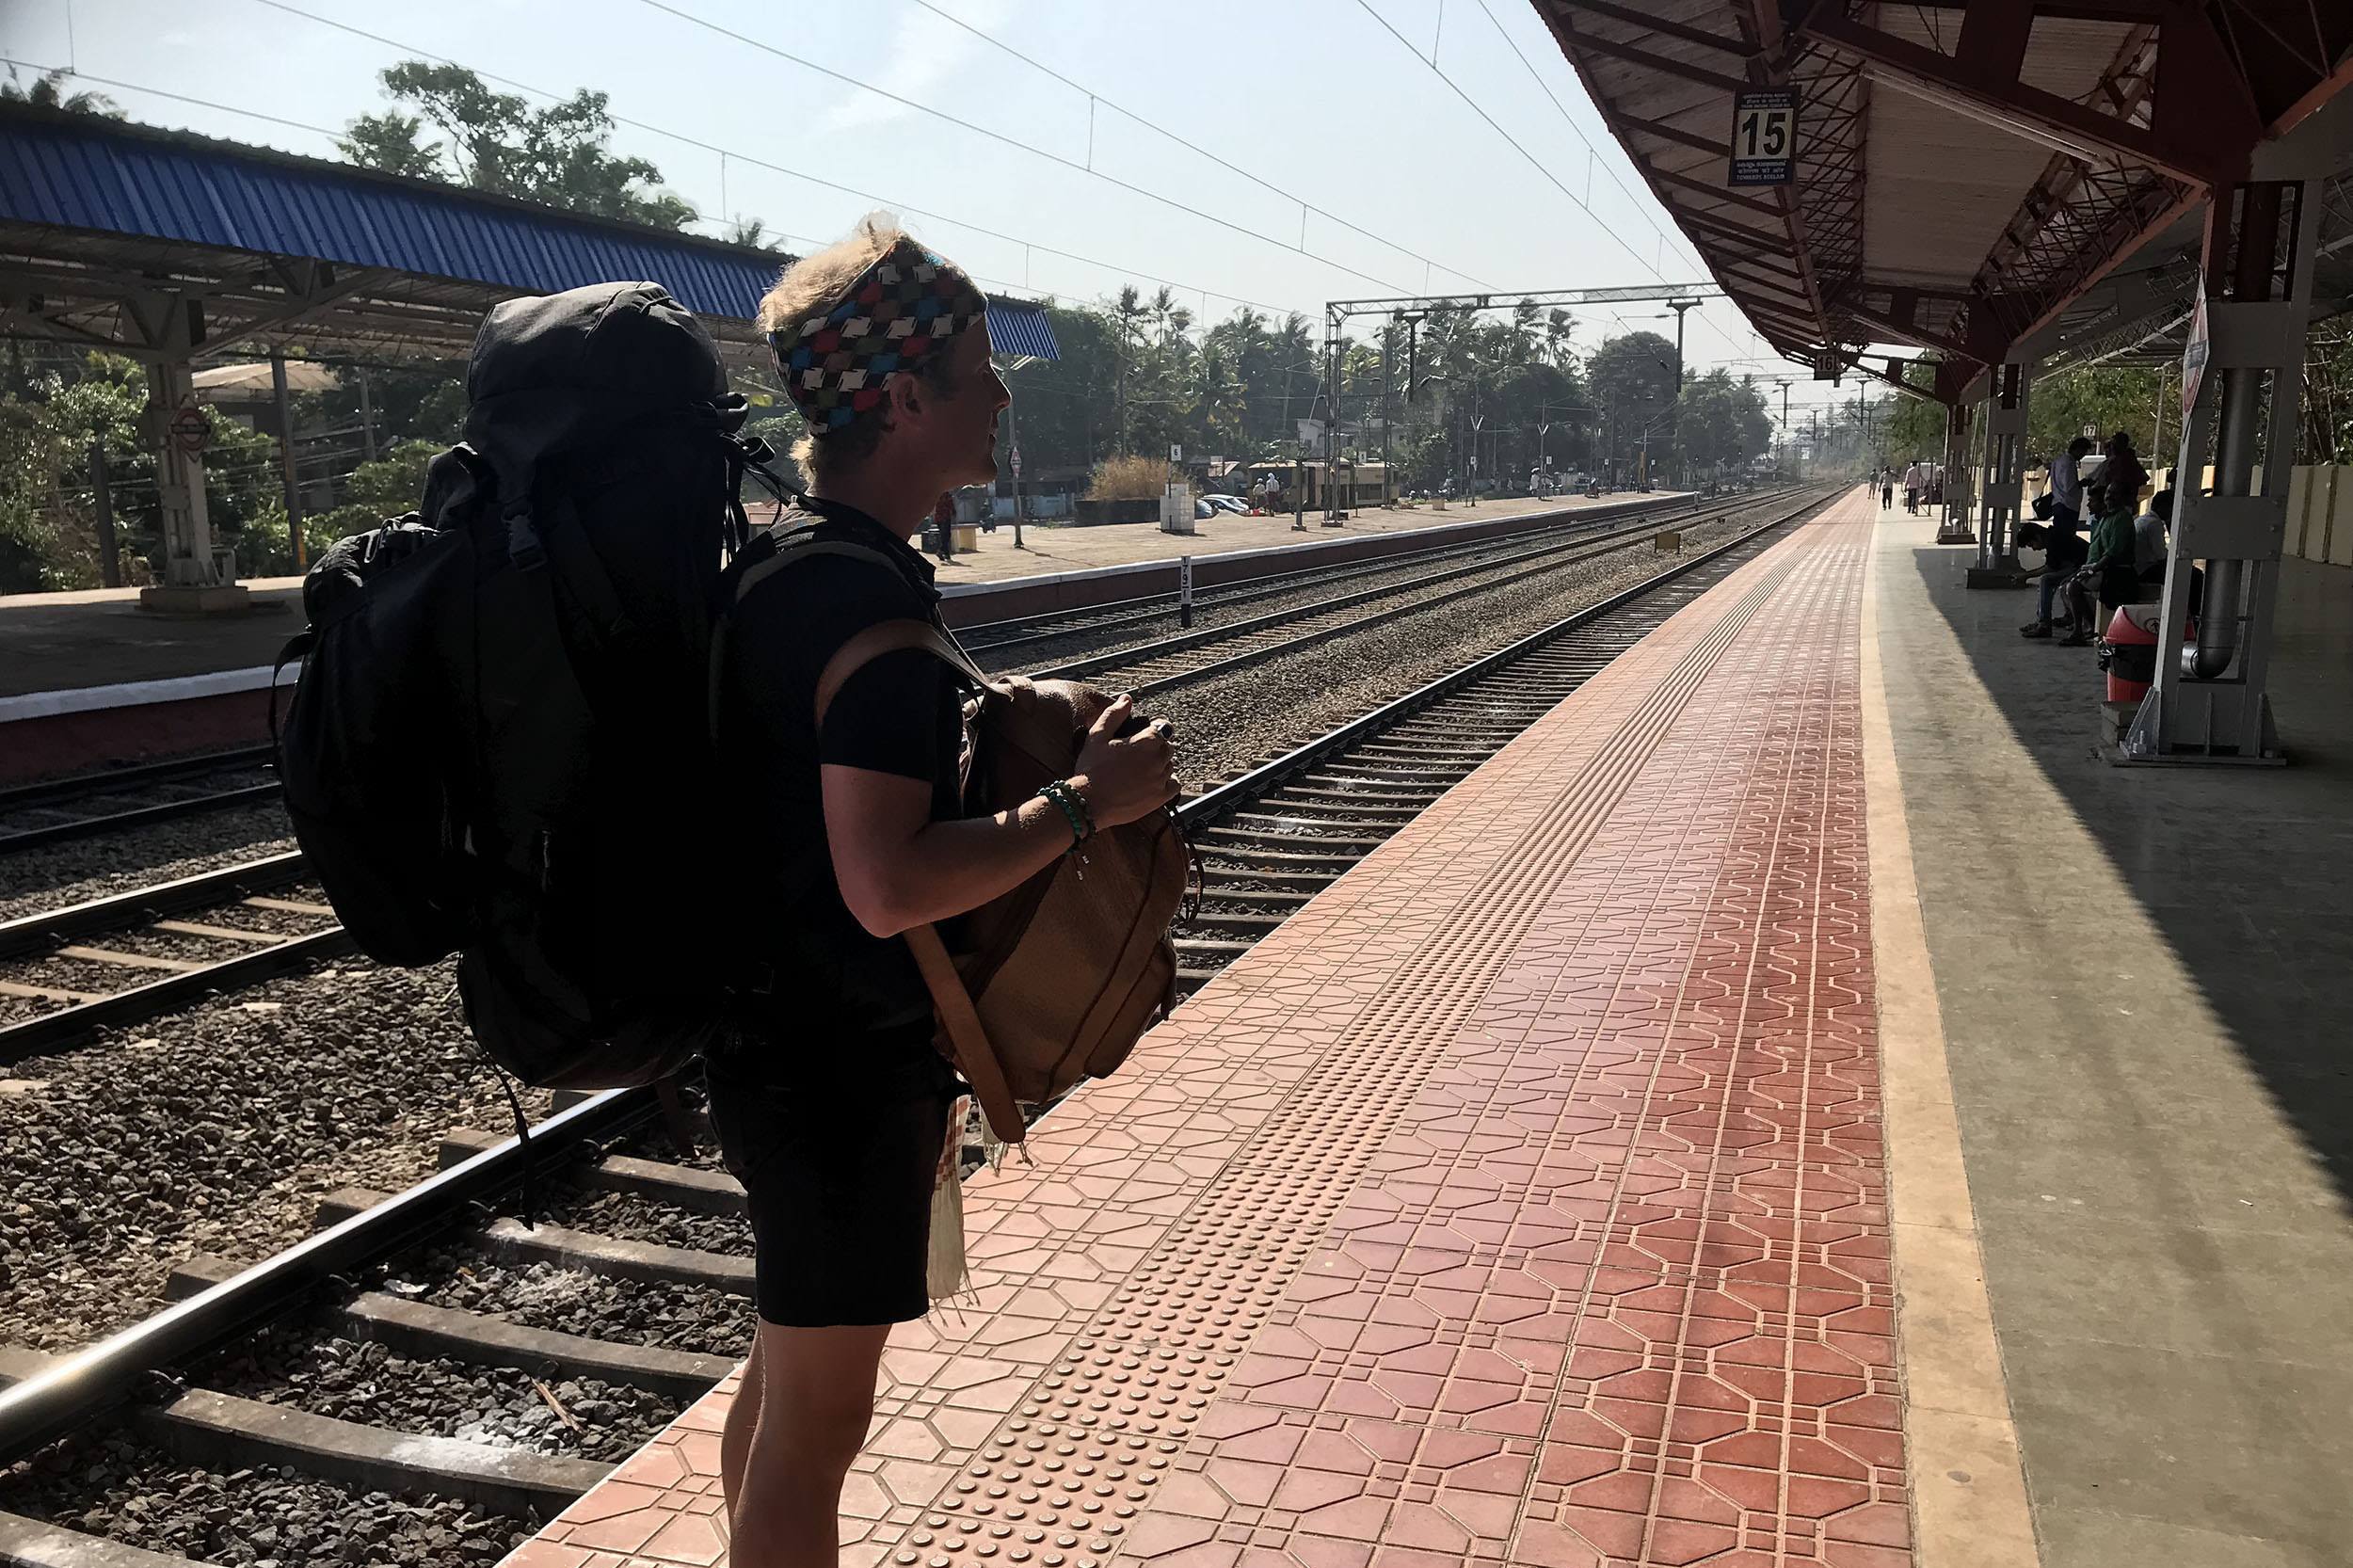 Ben with a Kathmandu backpack on the platform of a train station in Kerala India